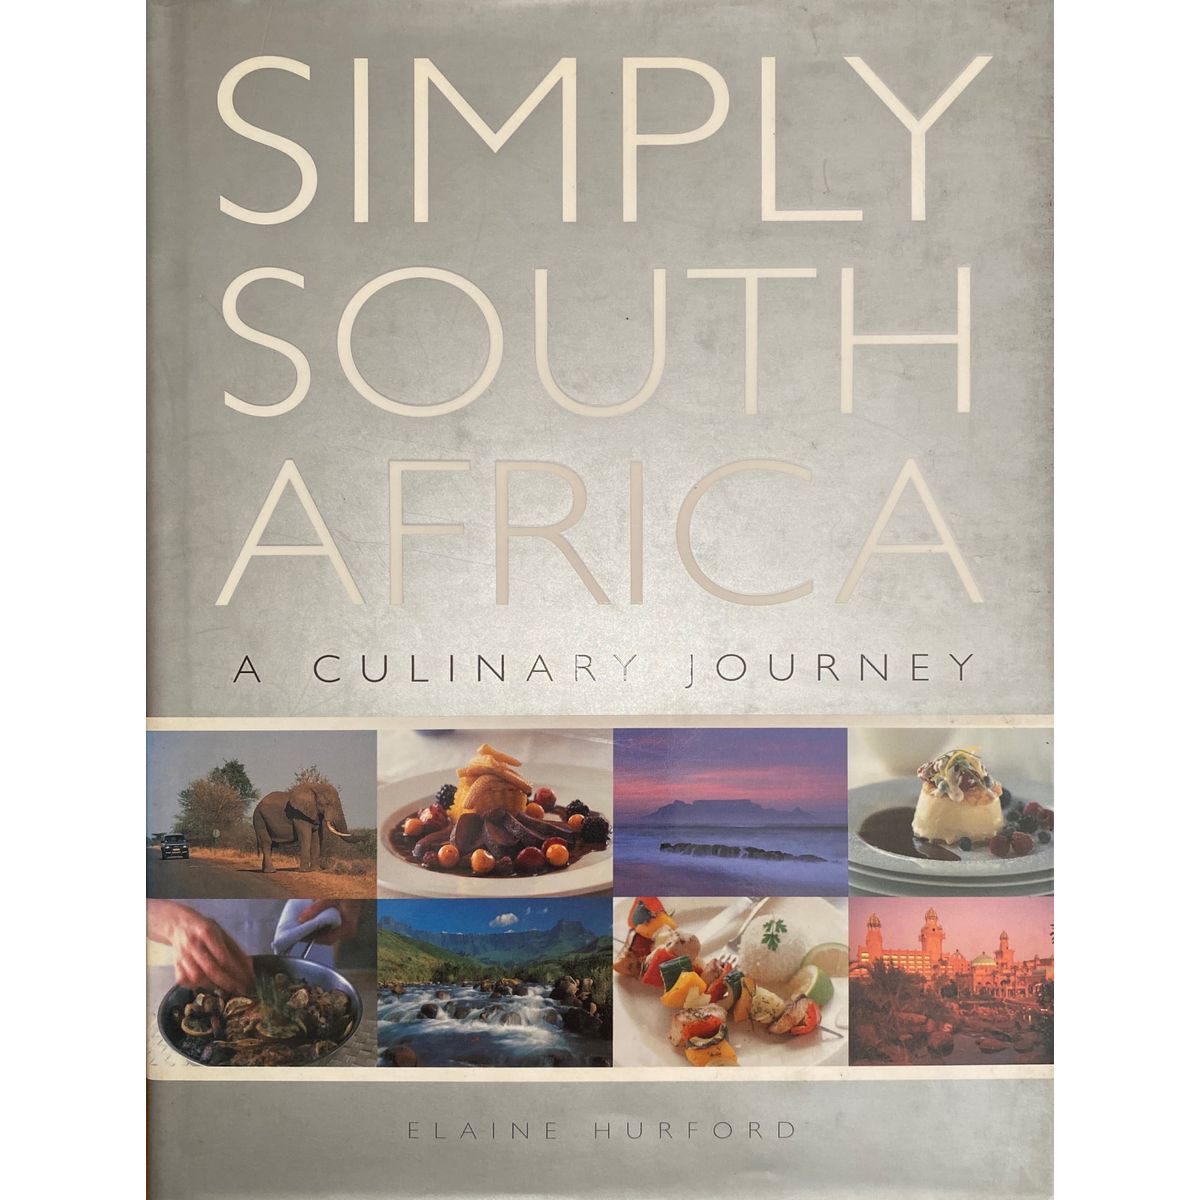 ISBN: 9781868724369 / 1868724360 - Simply South Africa: A Culinary Journey by Elaine Hurford [2001]